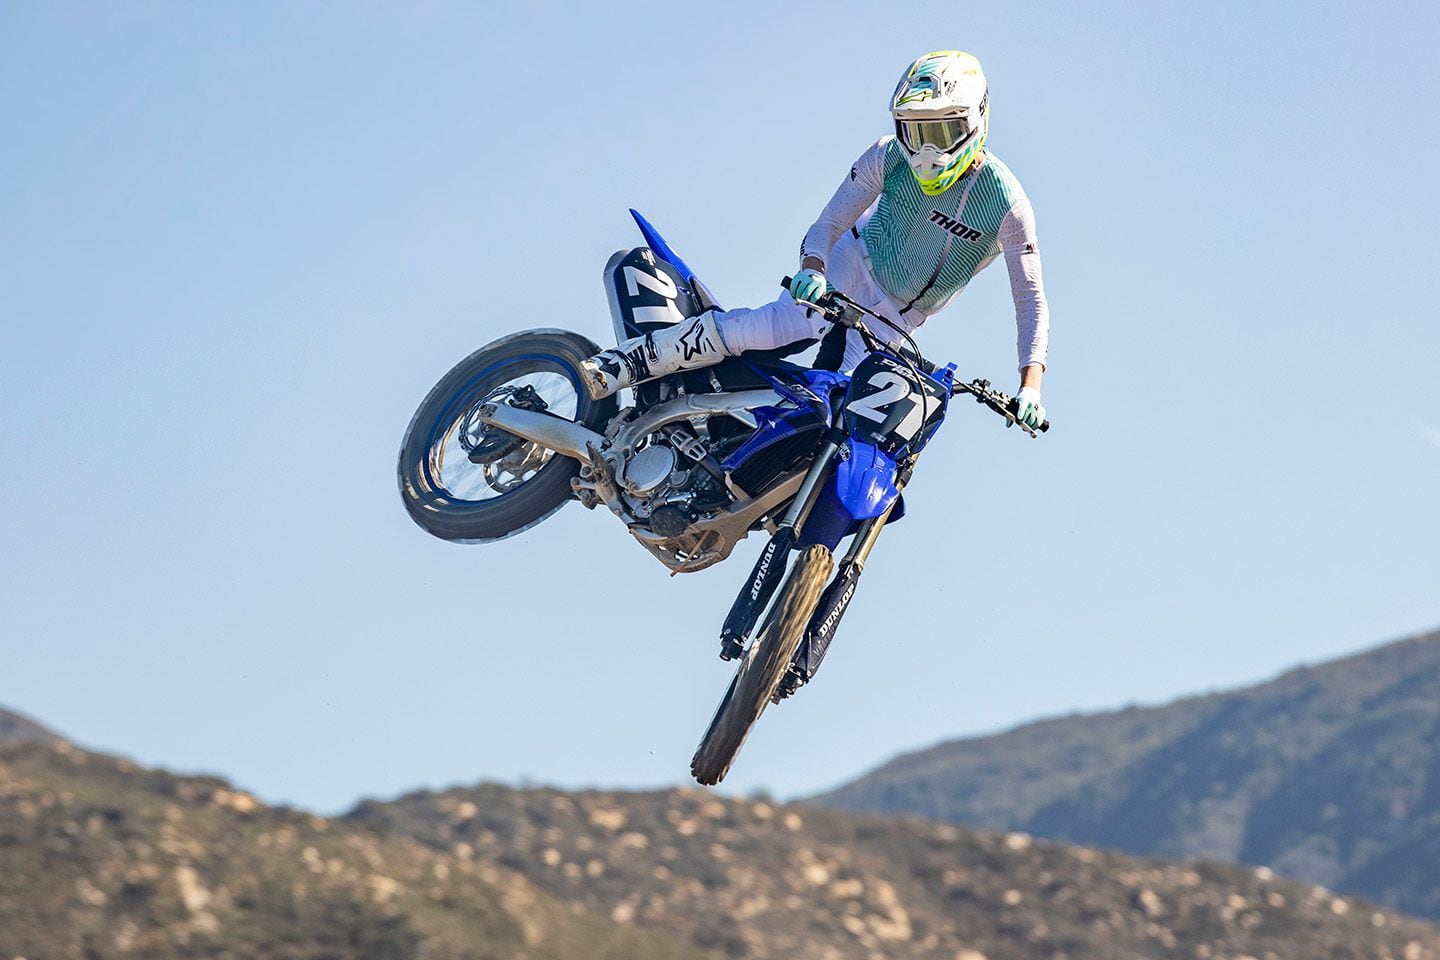 “The Yamaha YZ250F is just too good to overlook. It’s a great bike in stock trim and only improves with tasteful aftermarket modifications.”  <i>—Casey Casper</i>